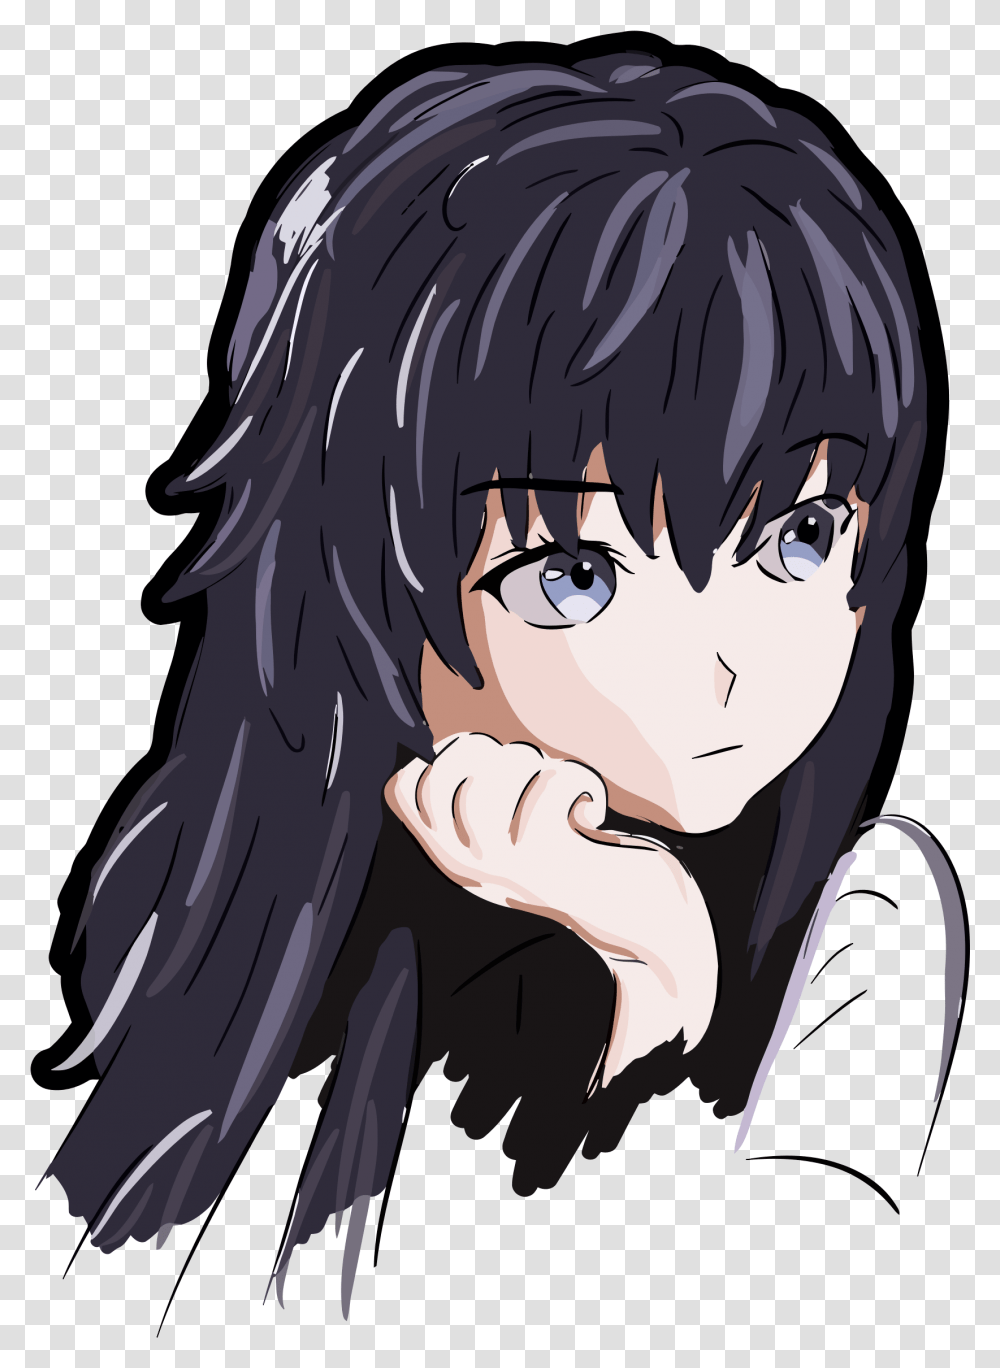 Library Of Anime Girl Vector Black And Whites Files Anime Girl Icon, Manga, Comics, Book, Hair Transparent Png